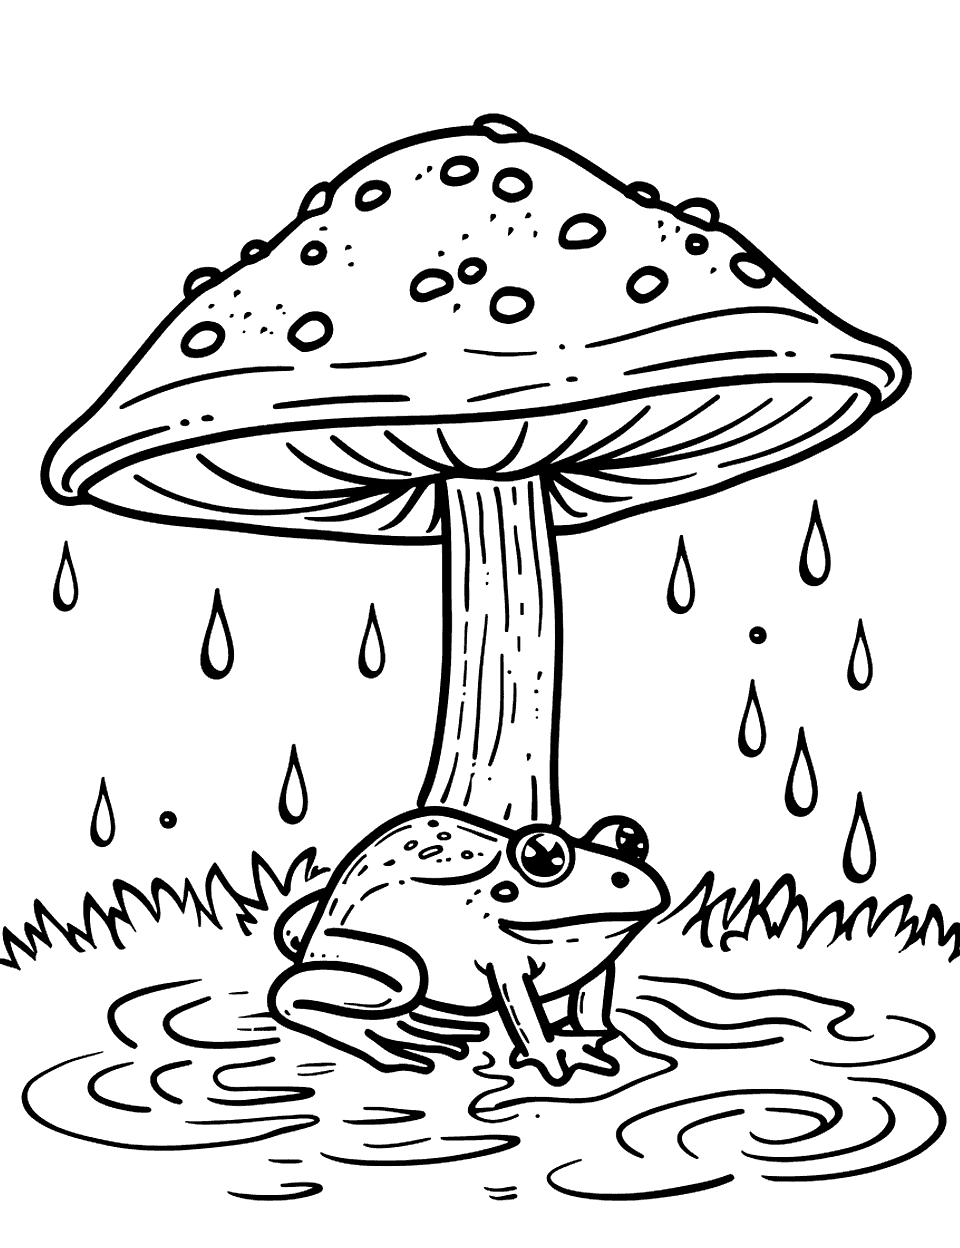 Frog and Mushroom in the Rain Coloring Page - A frog sits on a mushroom while raindrops create ripples in puddles around.